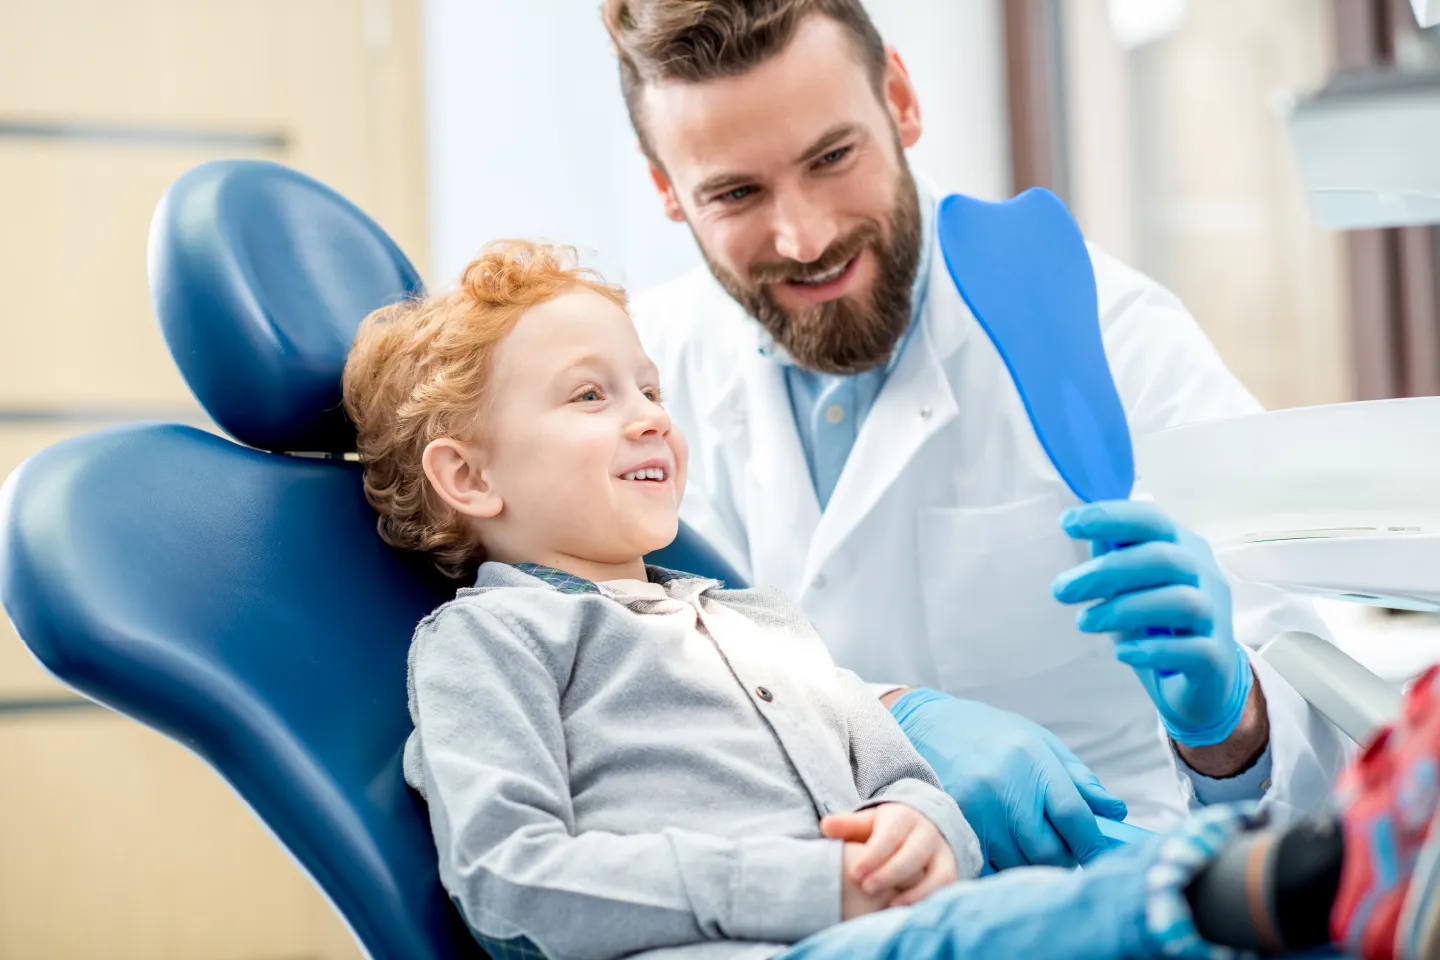 How Often Does a Child’s Teeth Need Cleaning From a Family Dentist?